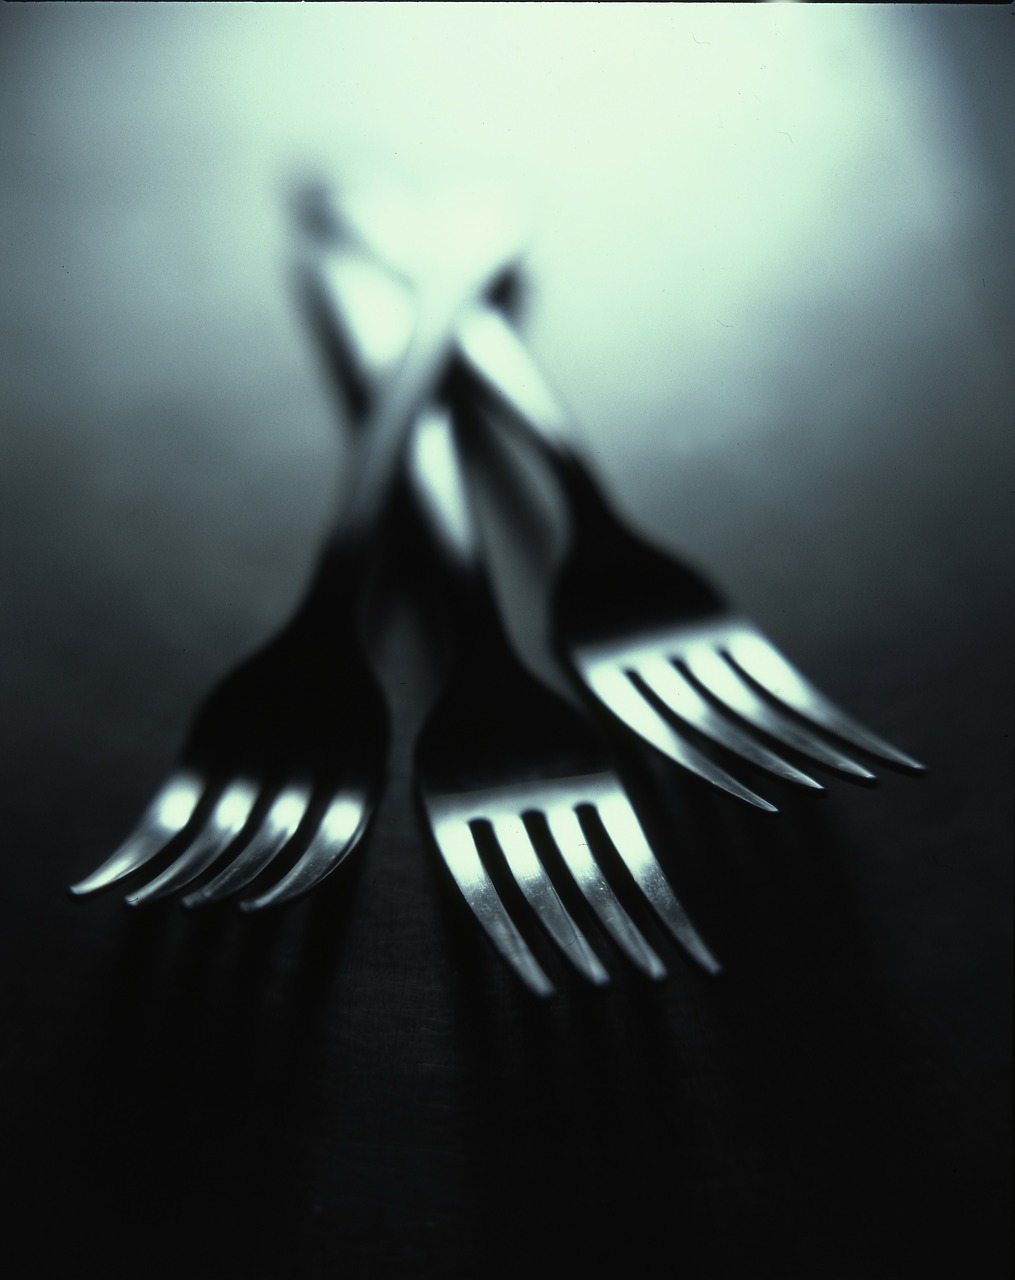 forks cutlery dishes free photo